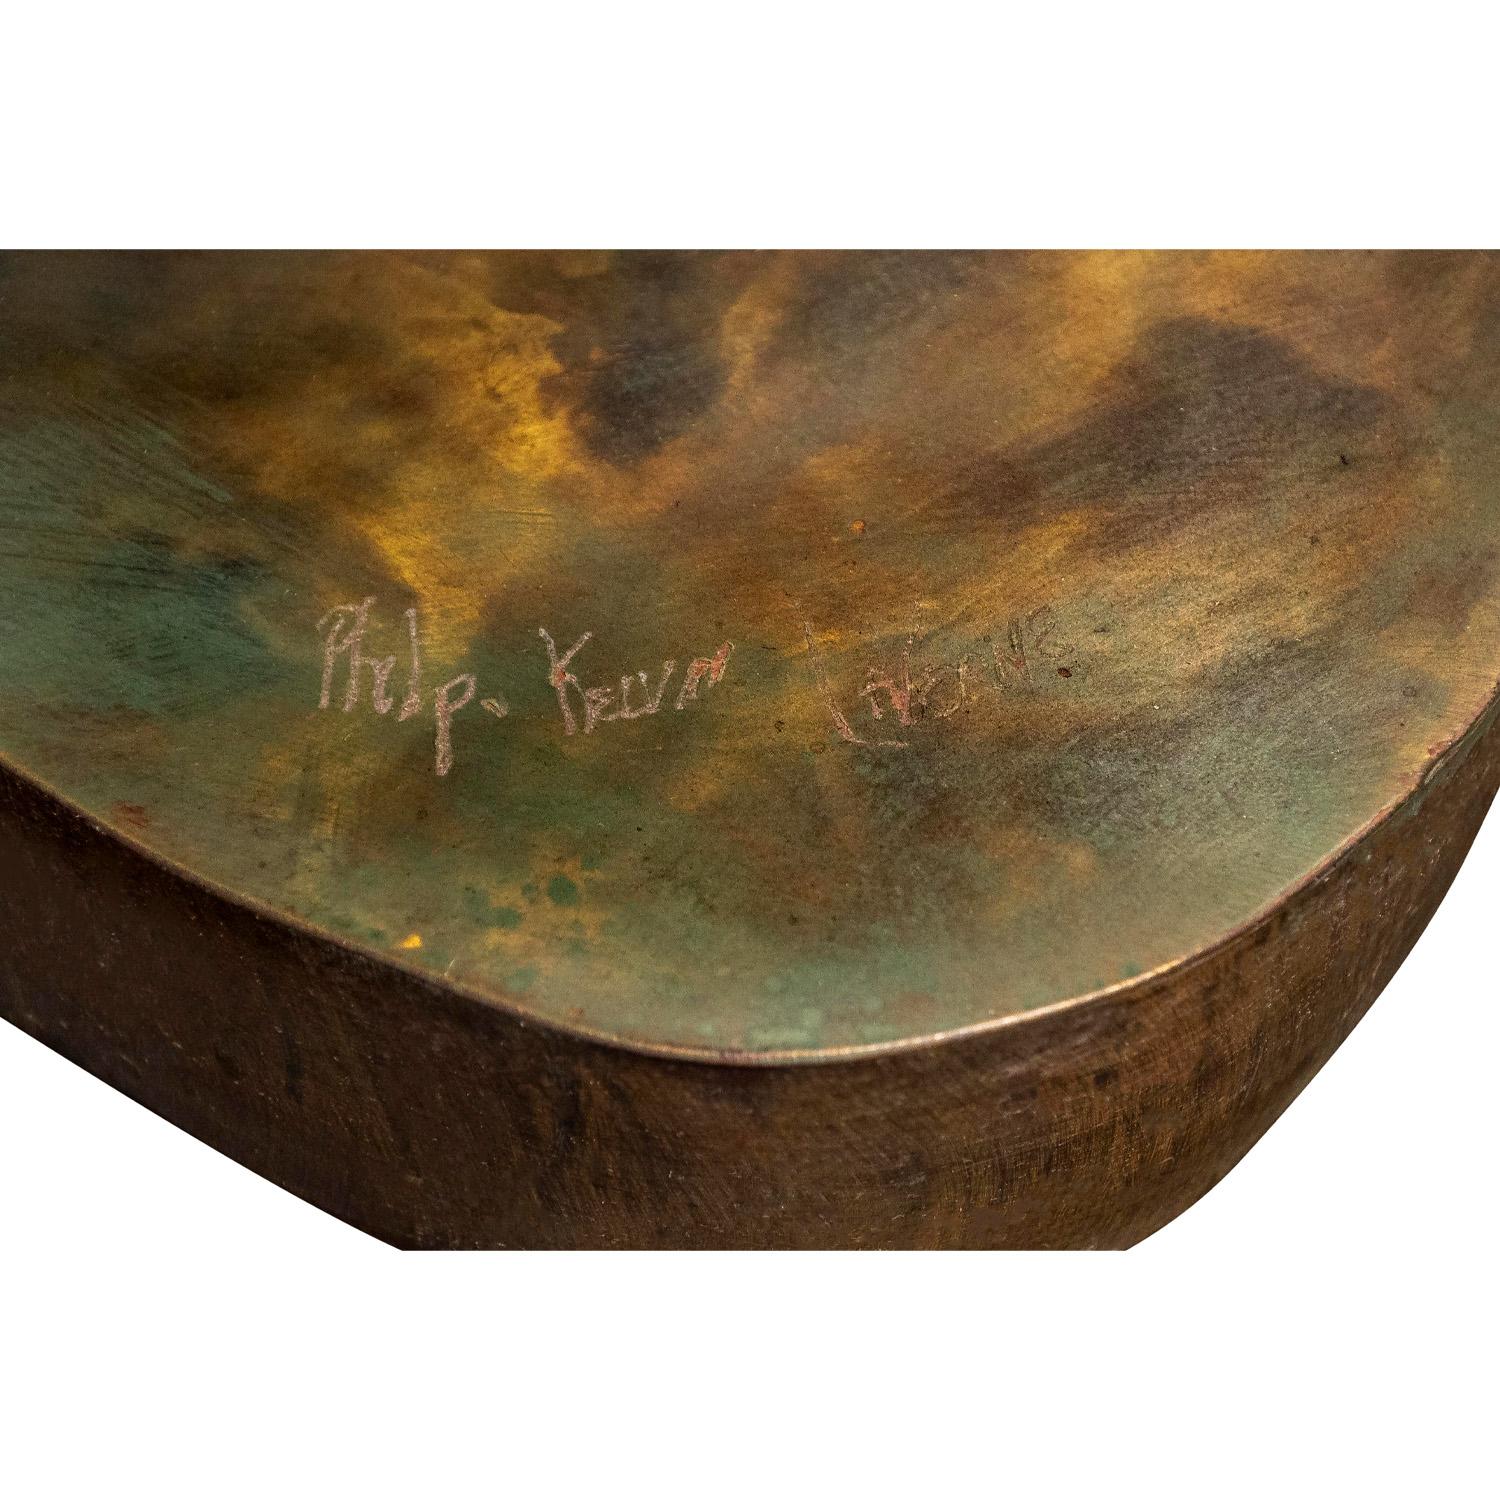 Bronze Philip and Kelvin LaVerne Rare and Important Cast Sculpture 1960s (Signed) For Sale